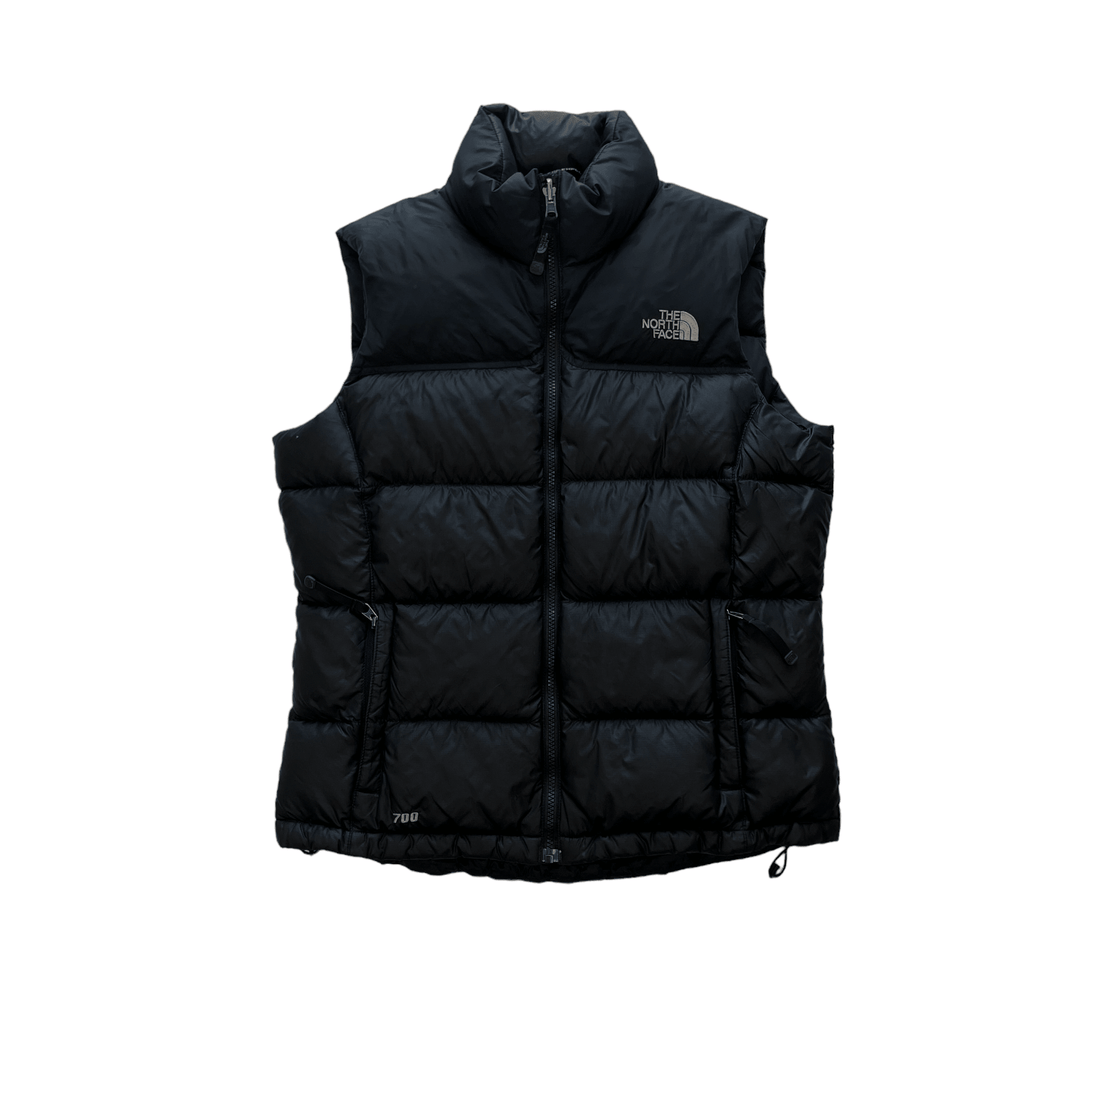 Vintage Black The North Face (TNF) Puffer Gilet - Small - The Streetwear Studio